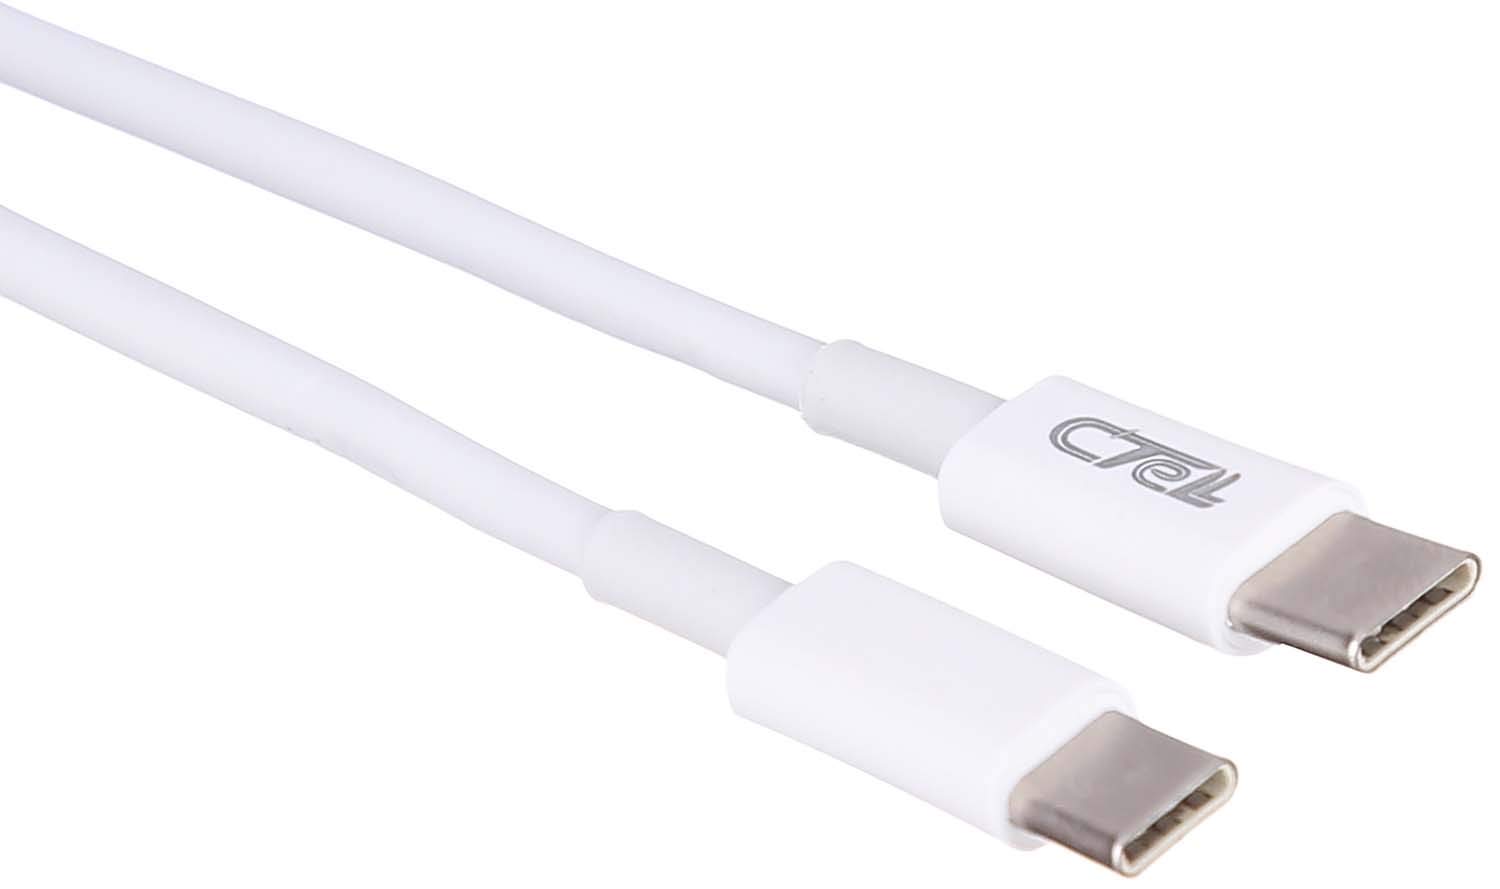 Cell Tel CT-000 Type C Cable for Mobile Phones - White